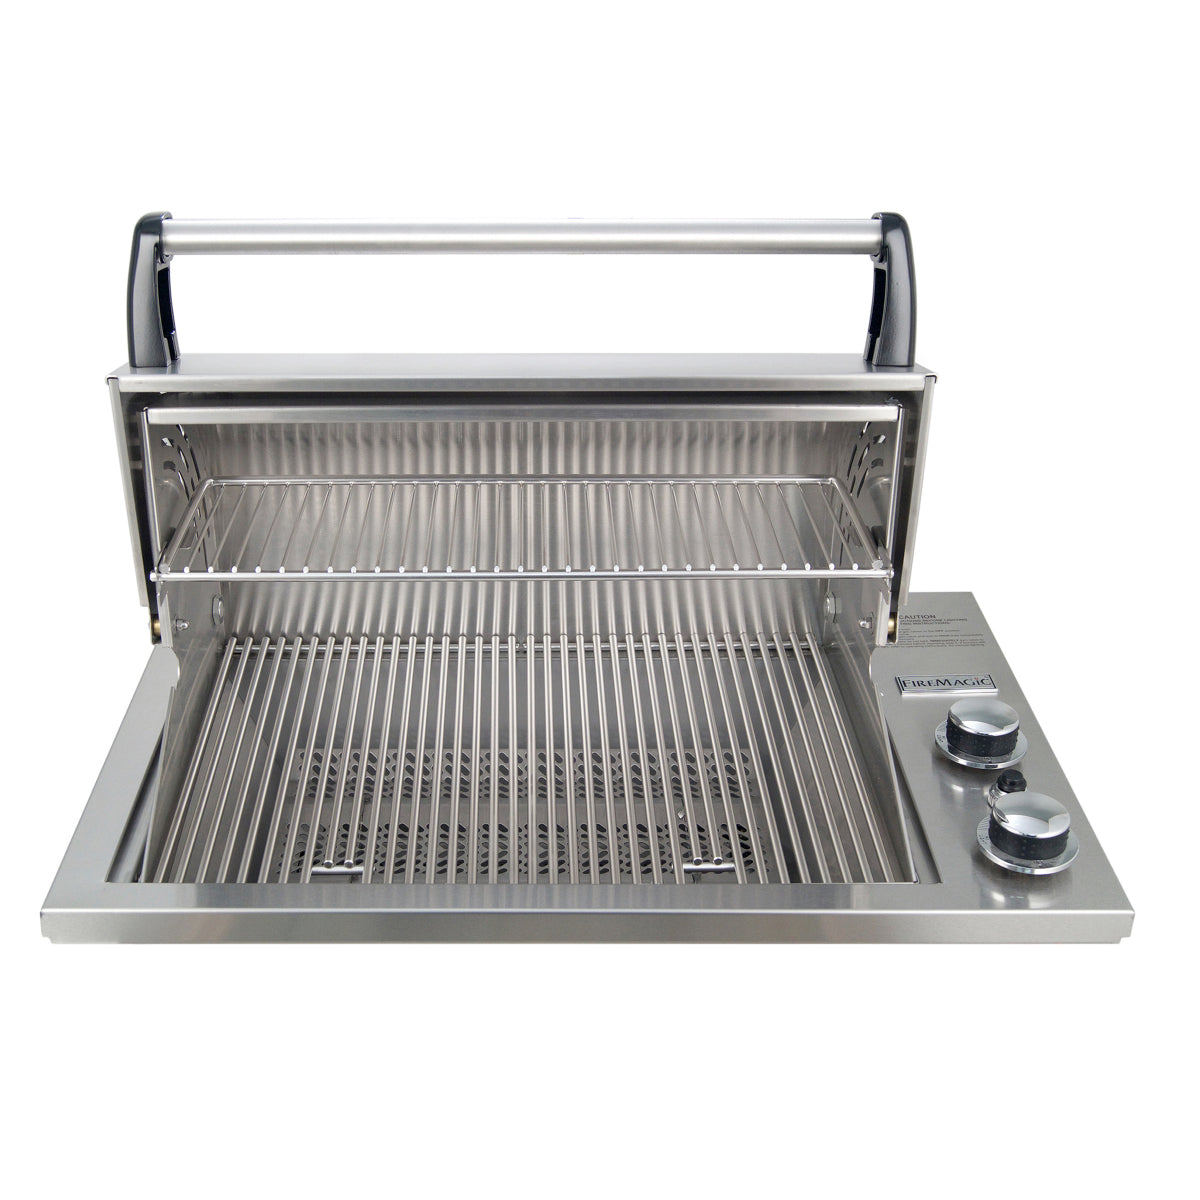 Fire Magic 24" Legacy Deluxe BBQ Grill - Upper Livin